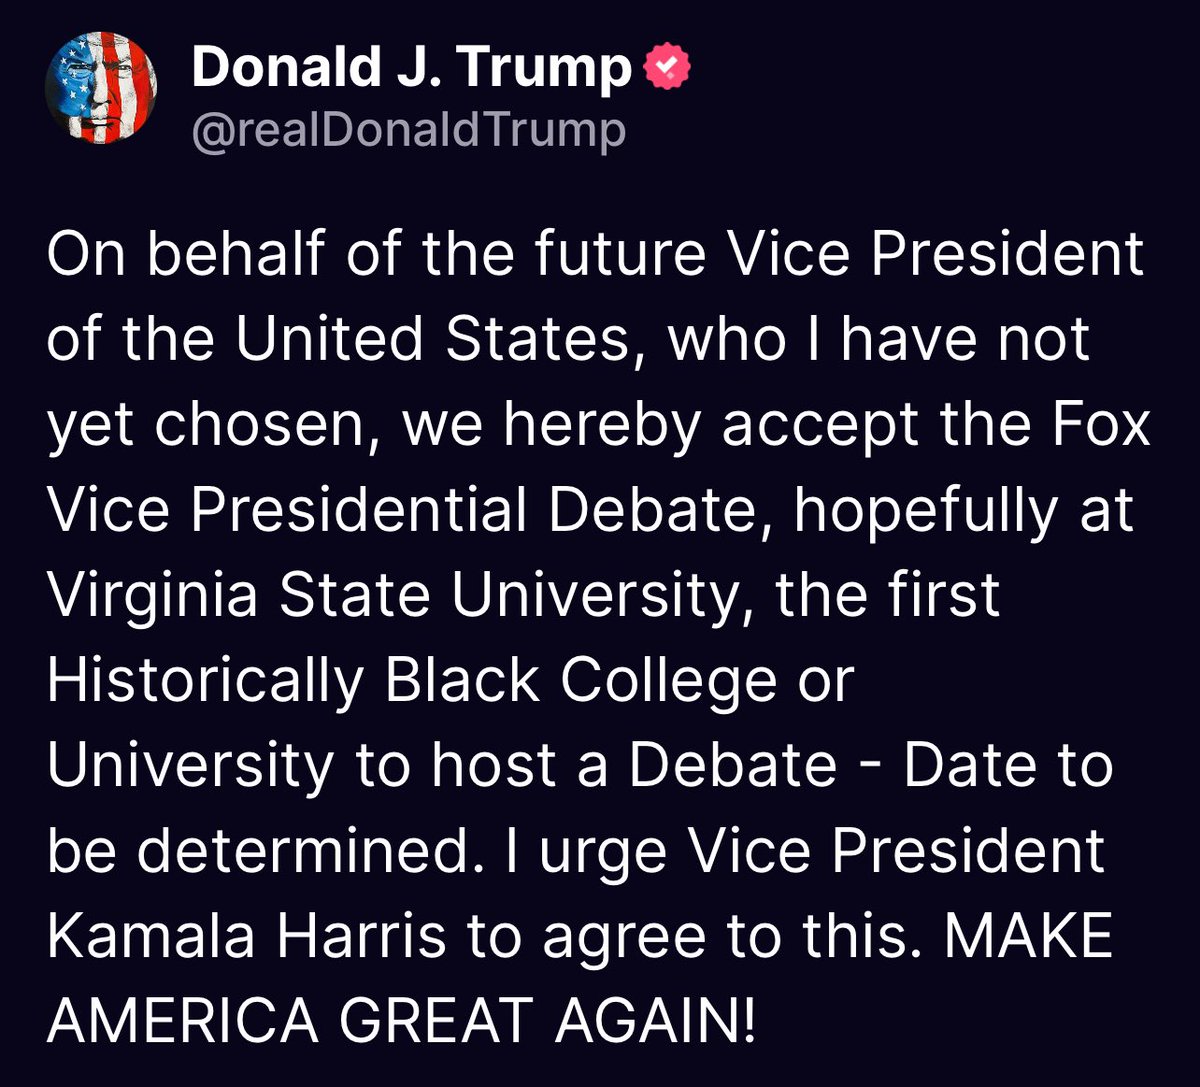 On behalf of the future Vice President of the United States, who I have not yet chosen, we hereby accept the Fox Vice Presidential Debate, hopefully at Virginia State University, the first Historically Black College or University to host a Debate - Date to be determined. I urge